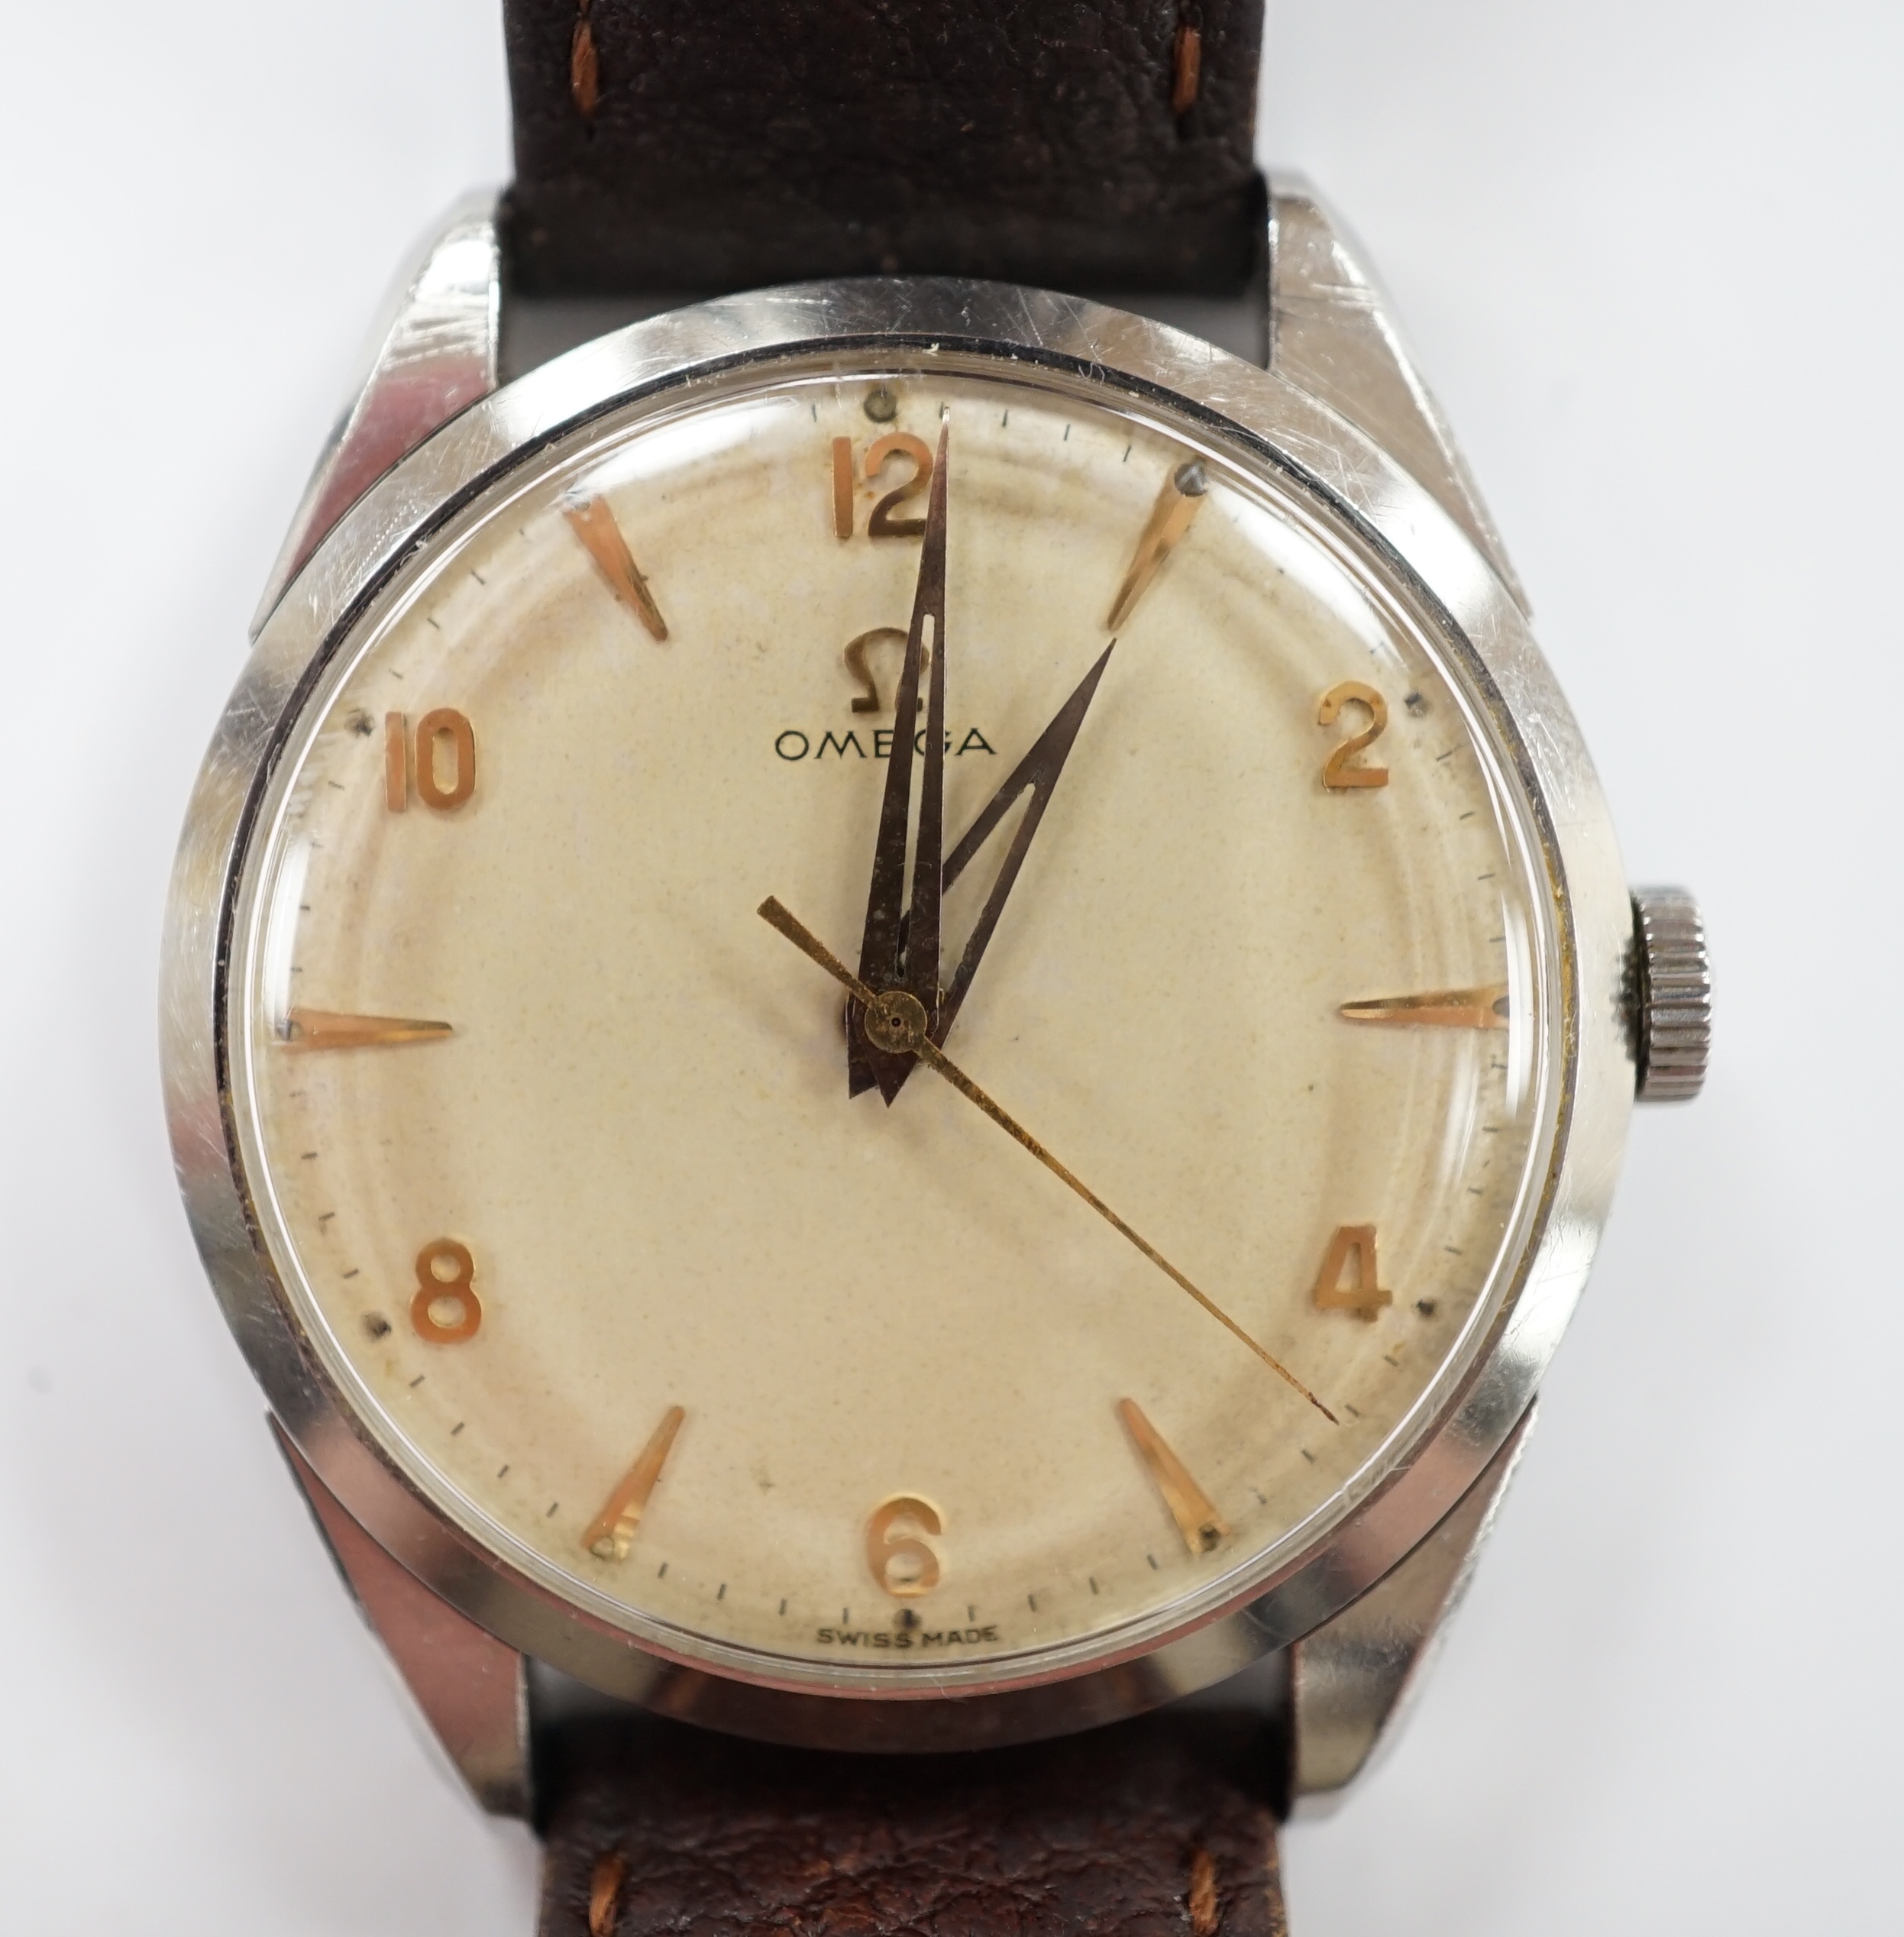 A gentleman's late 1950's stainless steel Omega manual wind wrist watch, with baton and Arabic numerals, movement c.284, on associated strap, case diameter 35mm.